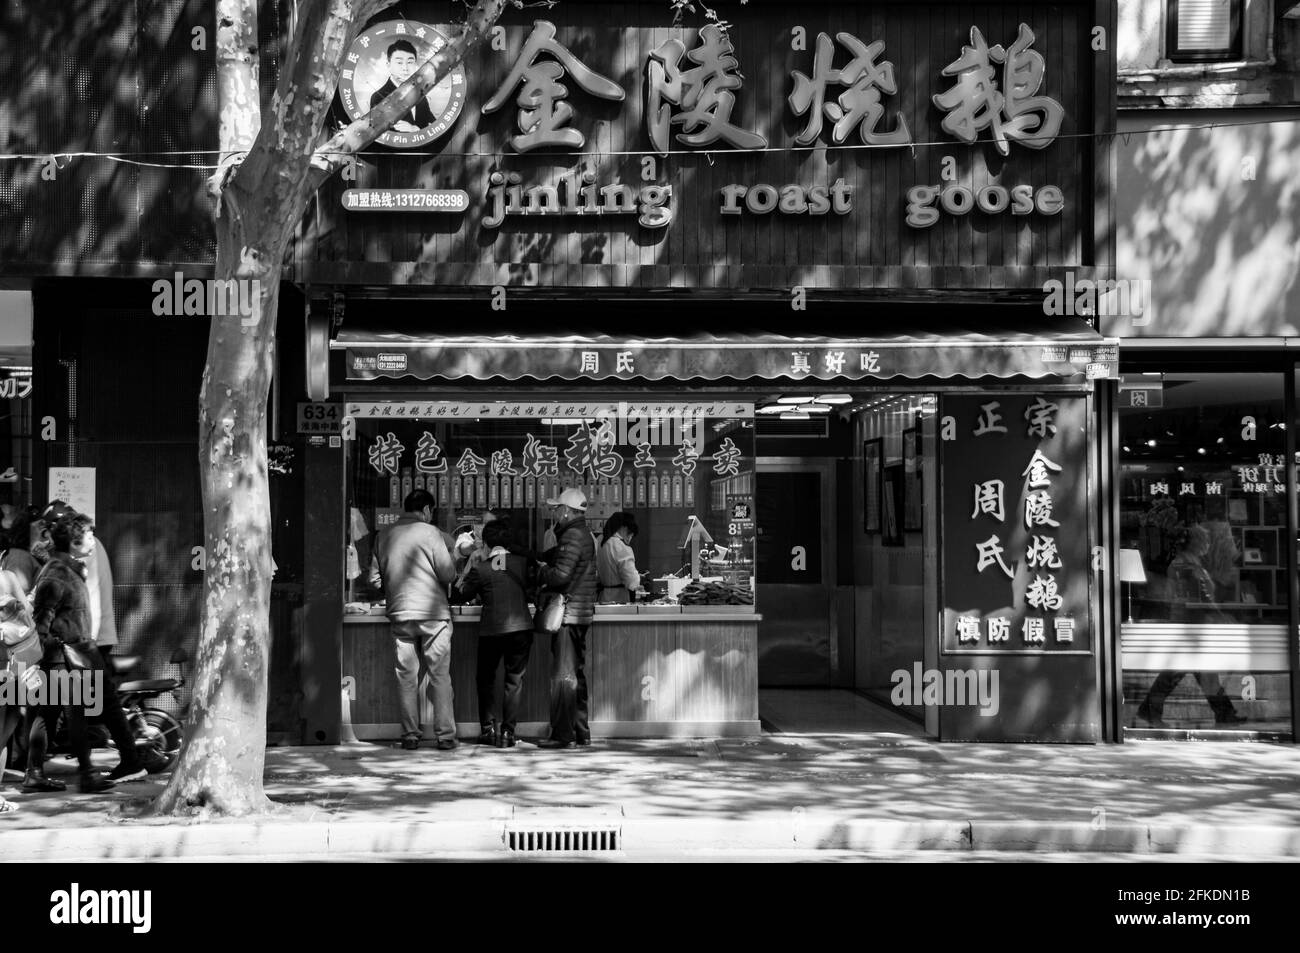 People buying roast goose from the Jinling Roast Goose store on Huai Hai Zhong lu in central Shanghai, China. Stock Photo